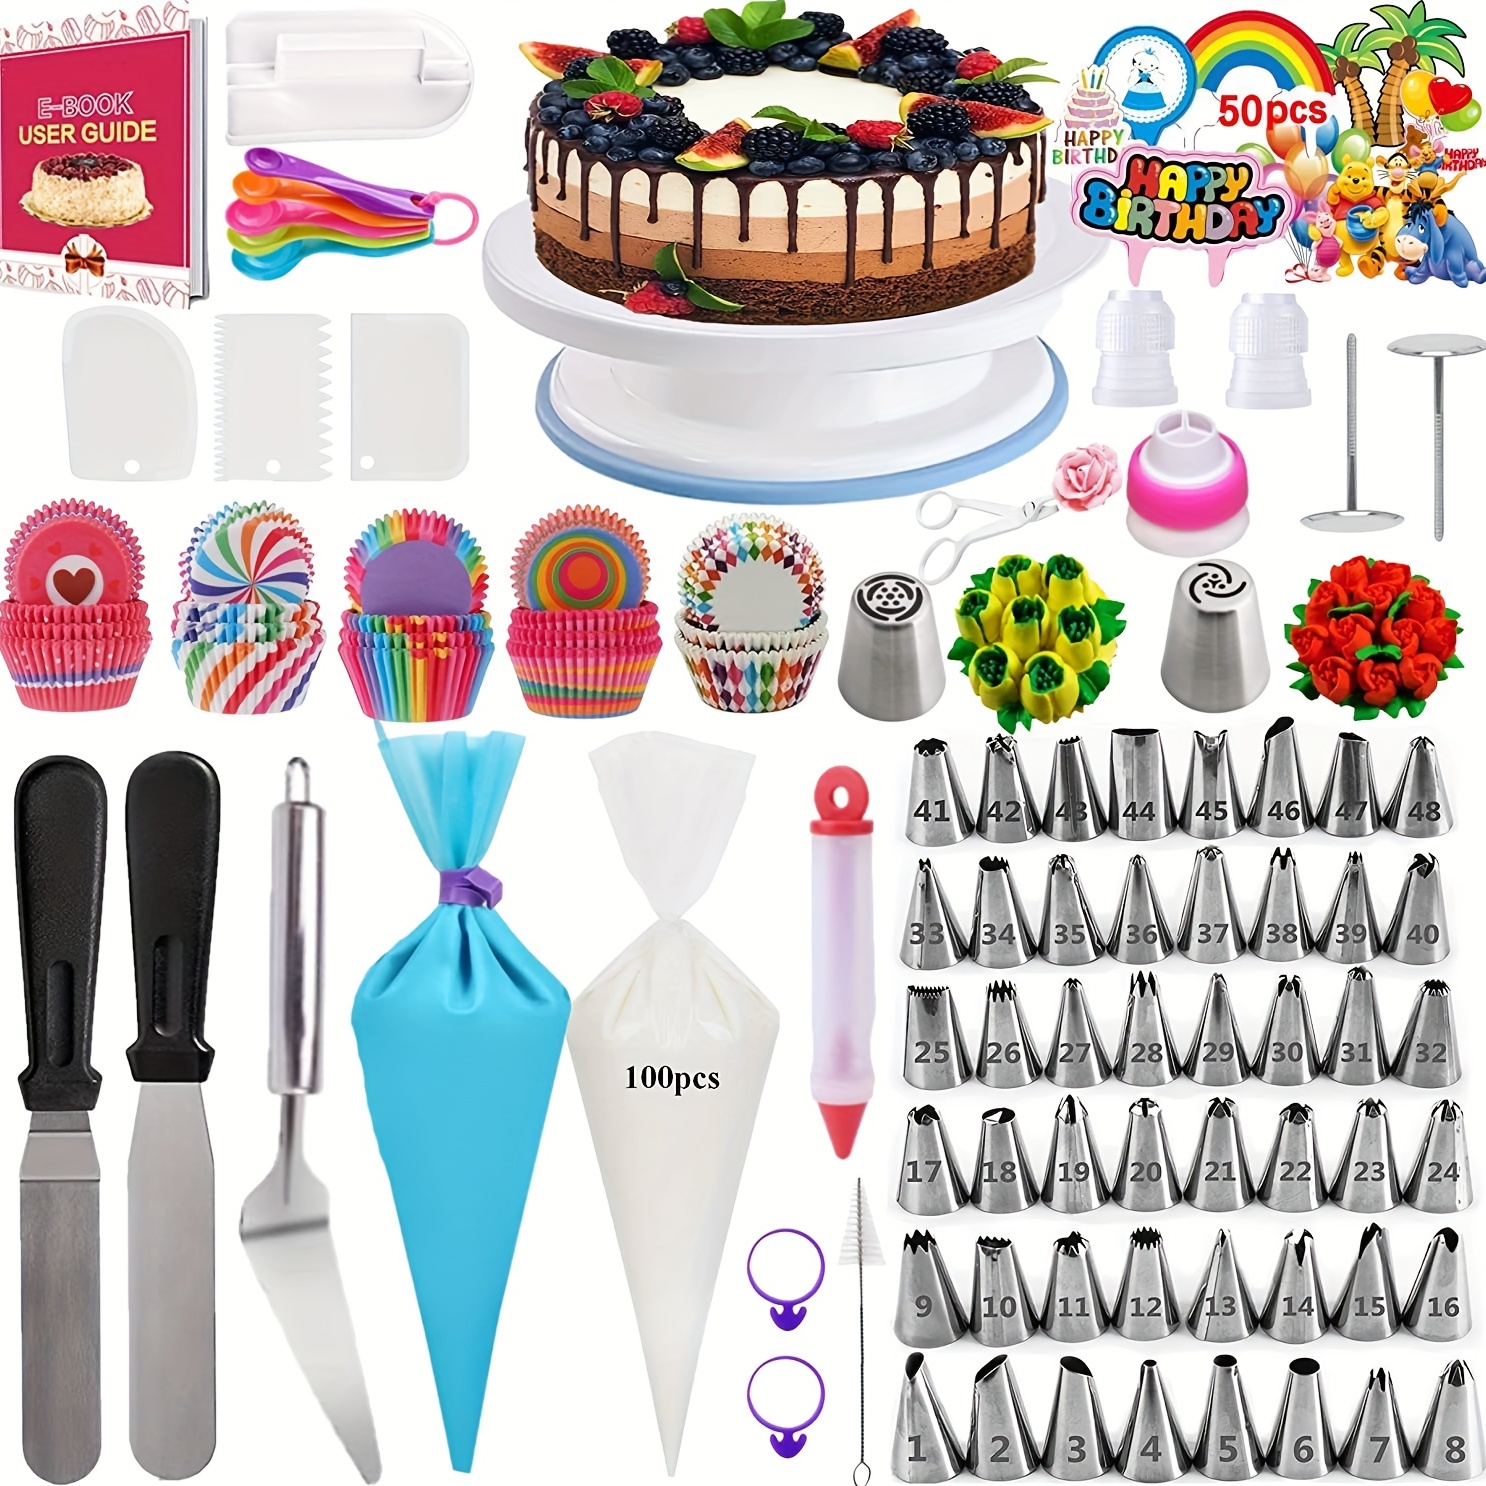 70 Pcs Cake Decorating Supplies Kit Baking Pastry Tools Set, 48 Numbered  Icing Tips with Pattern Chart, 6 Russian Piping Nozzles Tips, 6 Coupler and